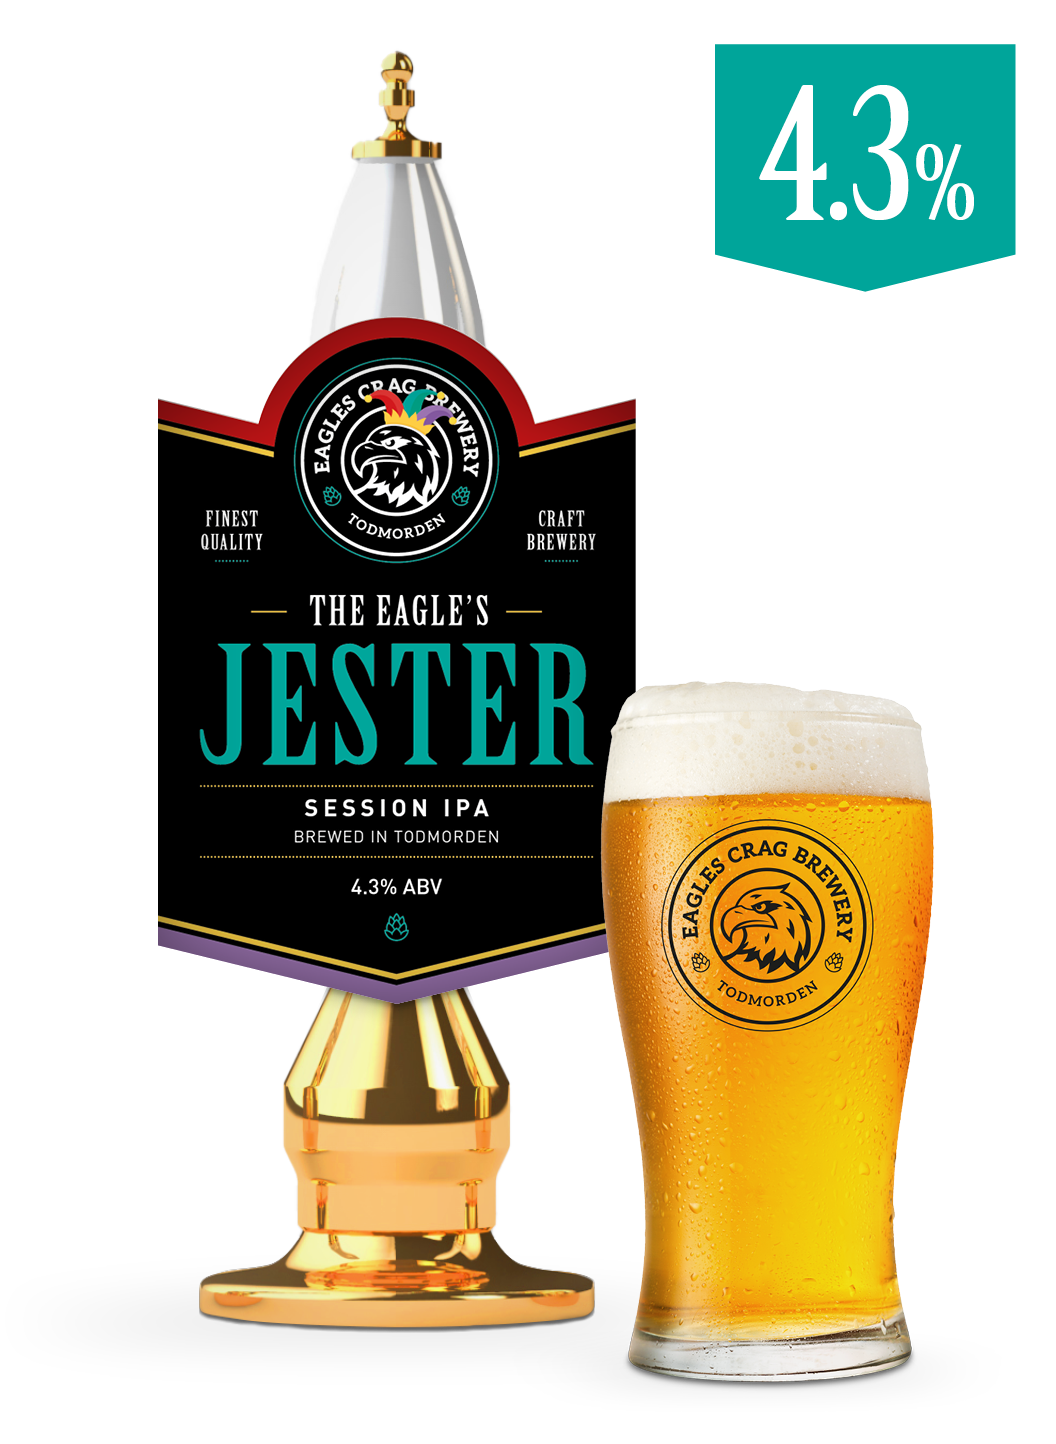 Craft beer cask and pint of The Eagle's Jester